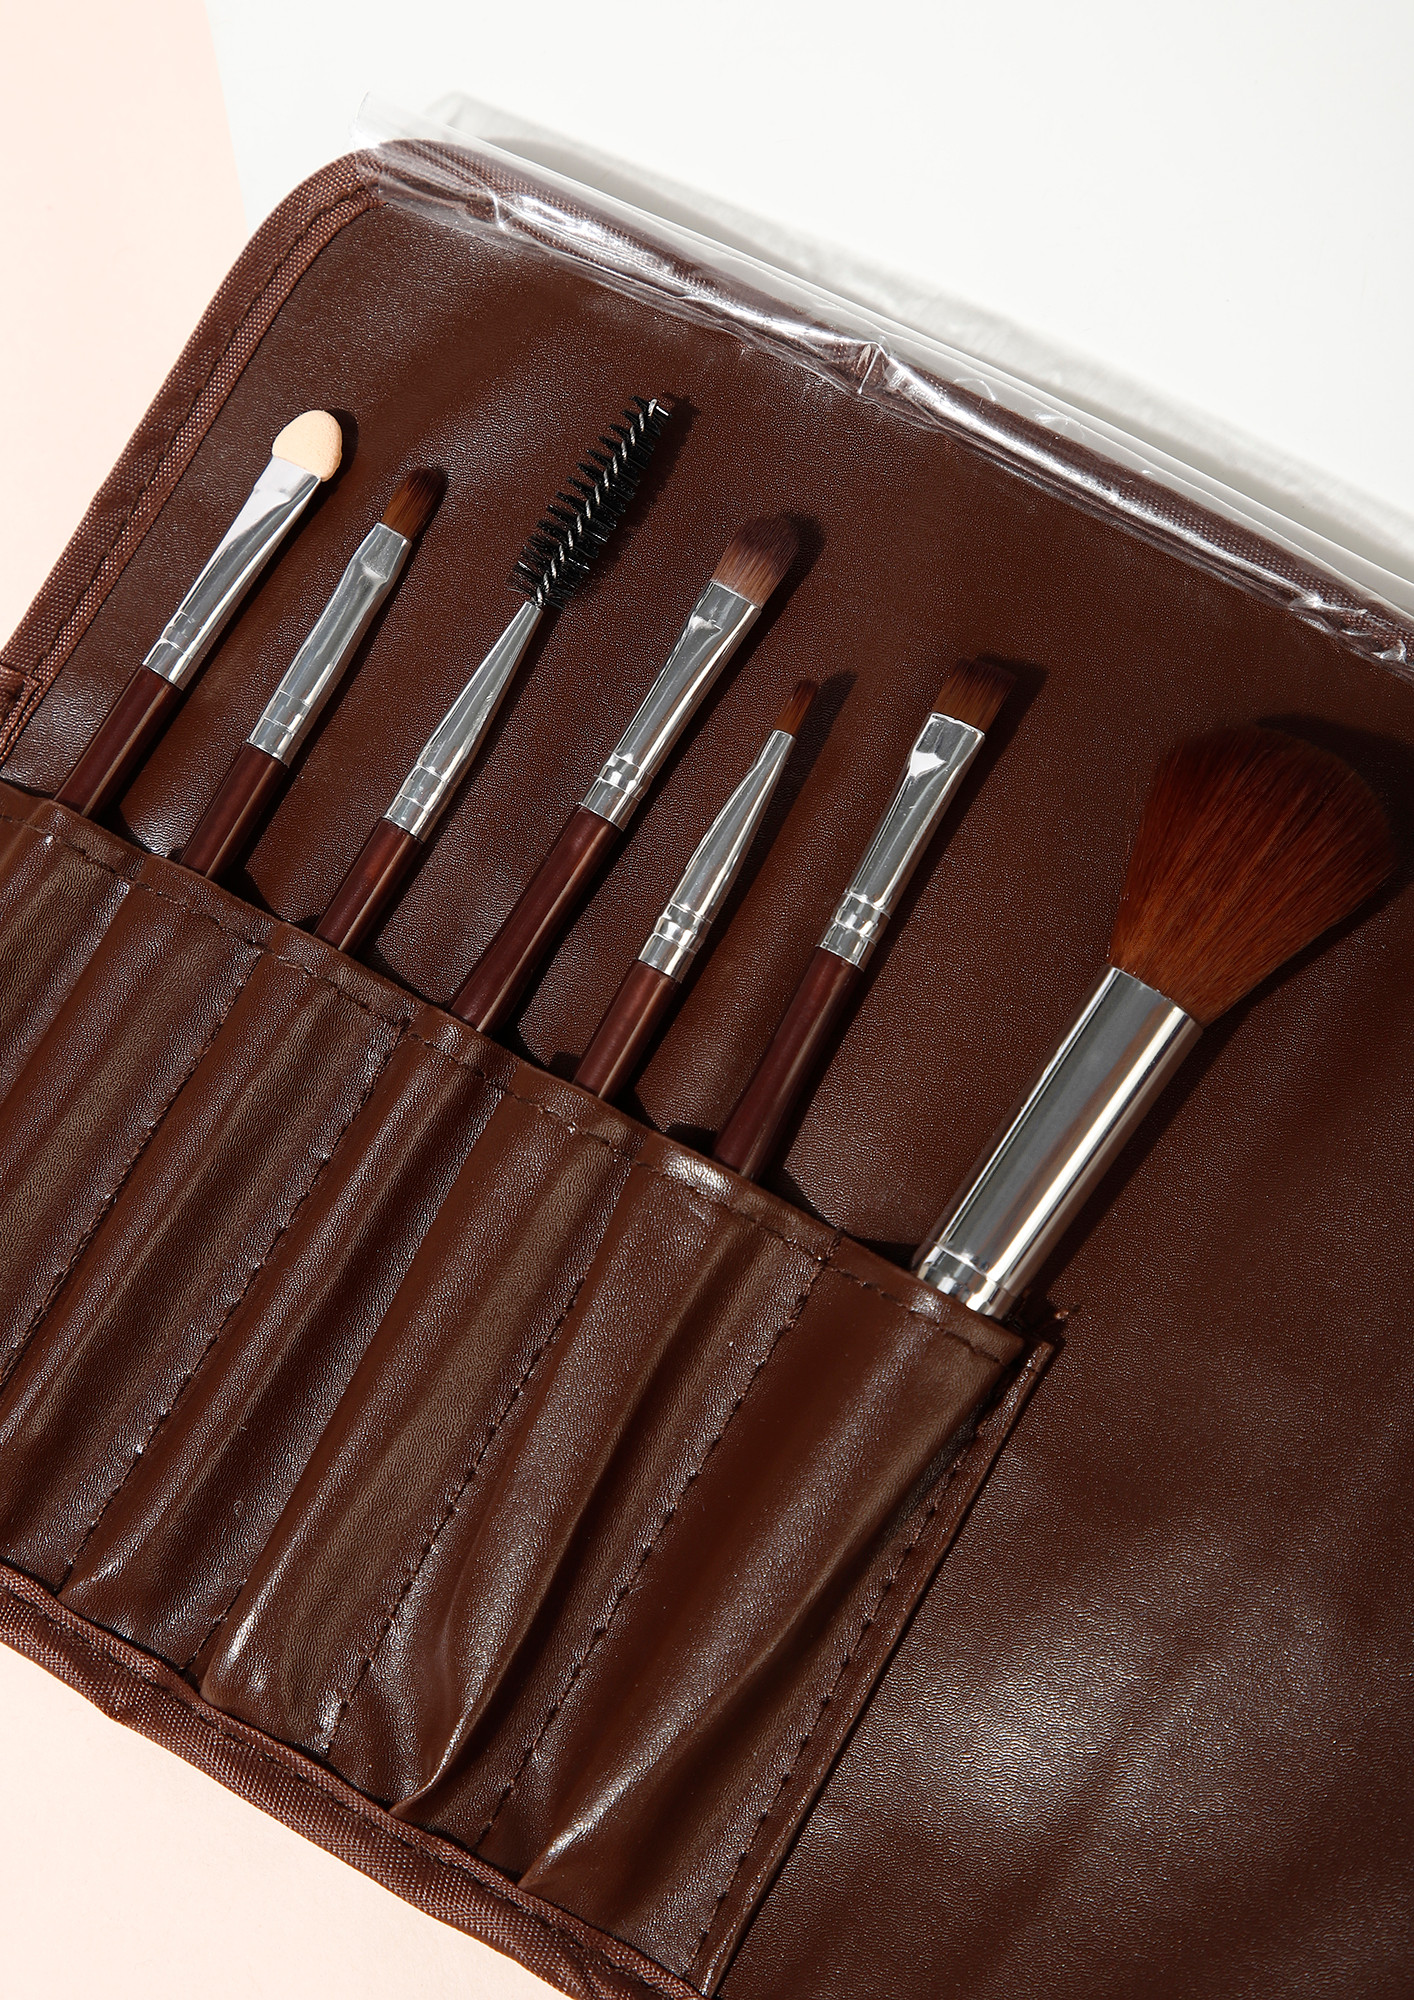 GLOW MAKERS COFFEE MAKEUP BRUSHES - SET OF 7